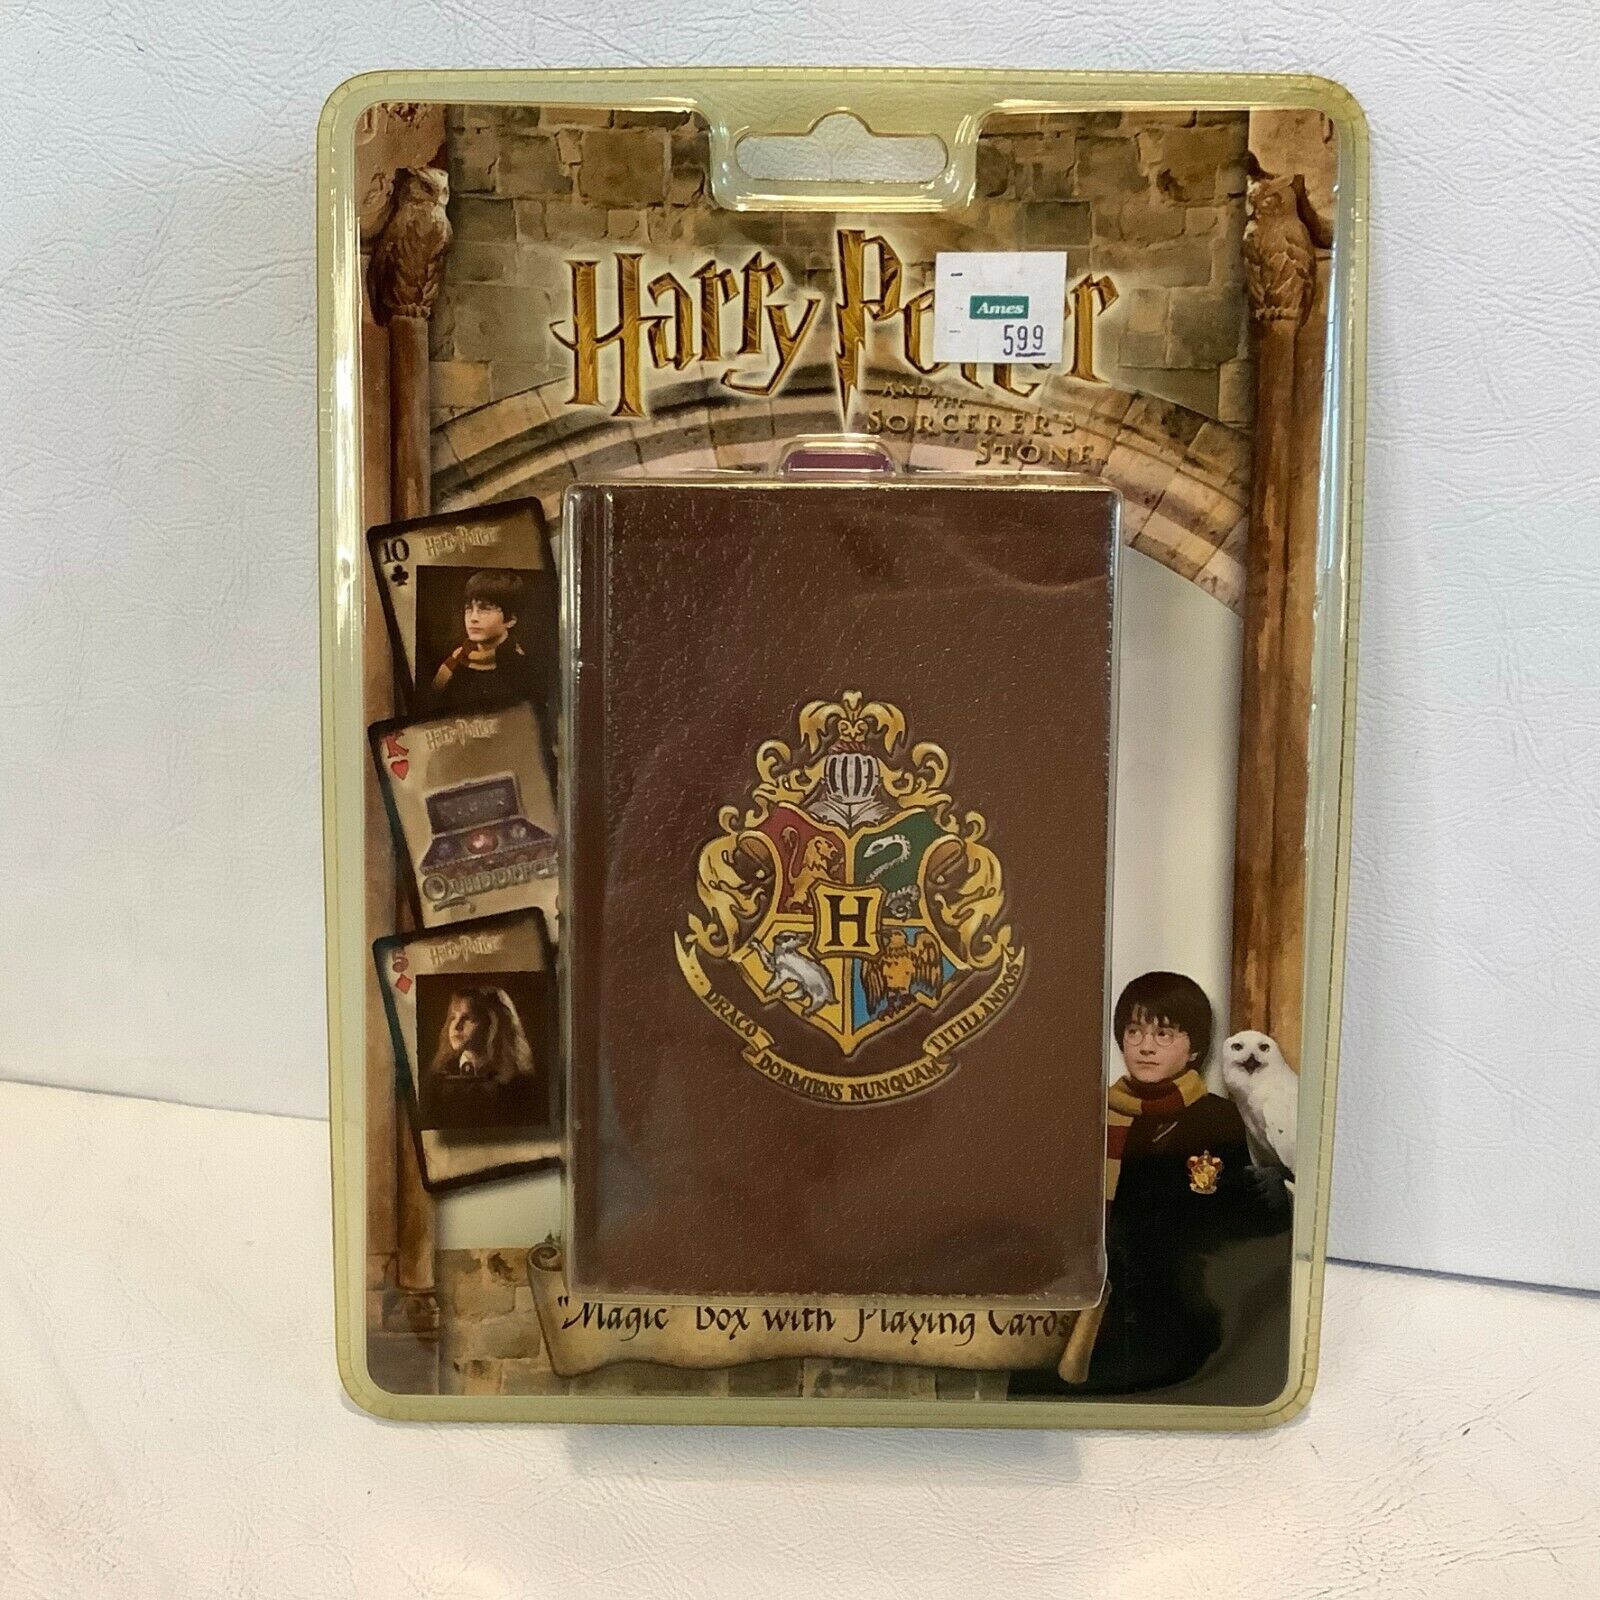 New Harry Potter and The Sorcerer's Stone Magicc Box w/Playing Cards Harry Potter